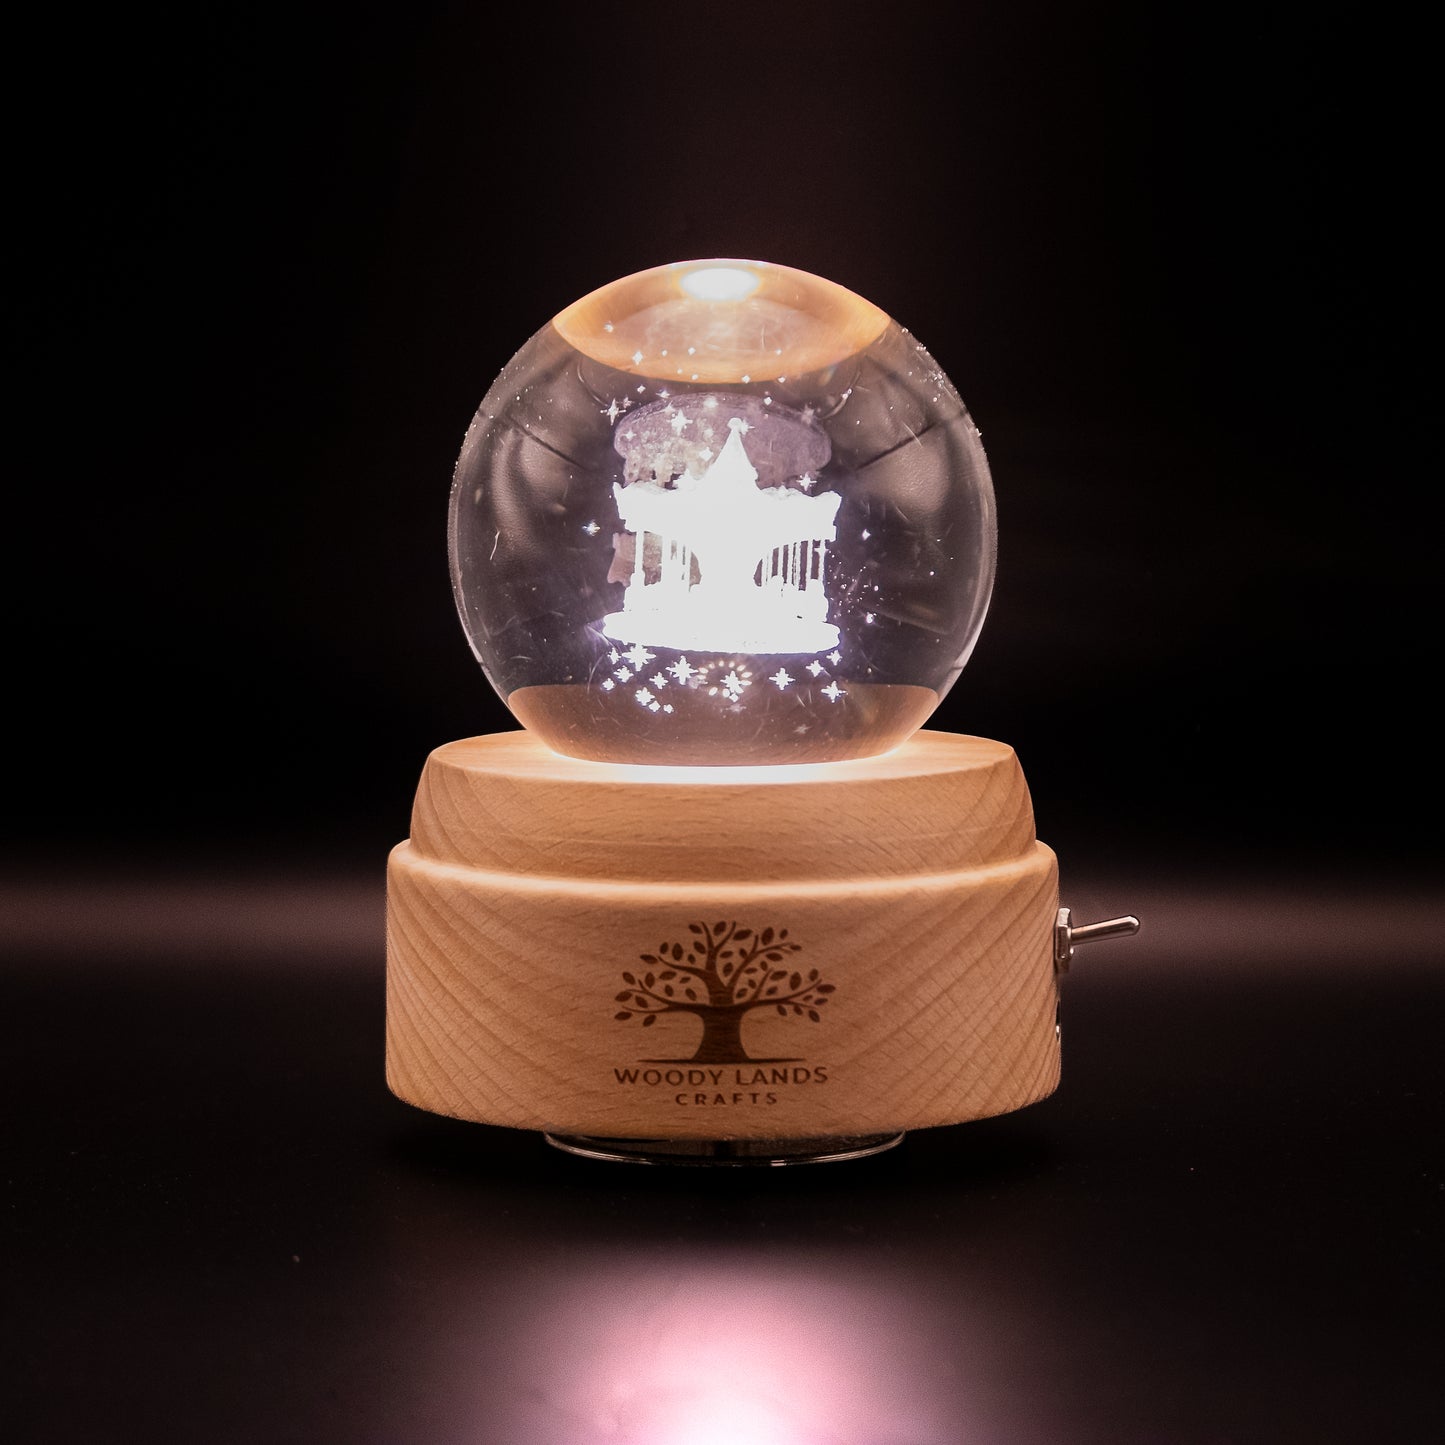 Woodylands Crystal Music Light - Carousel